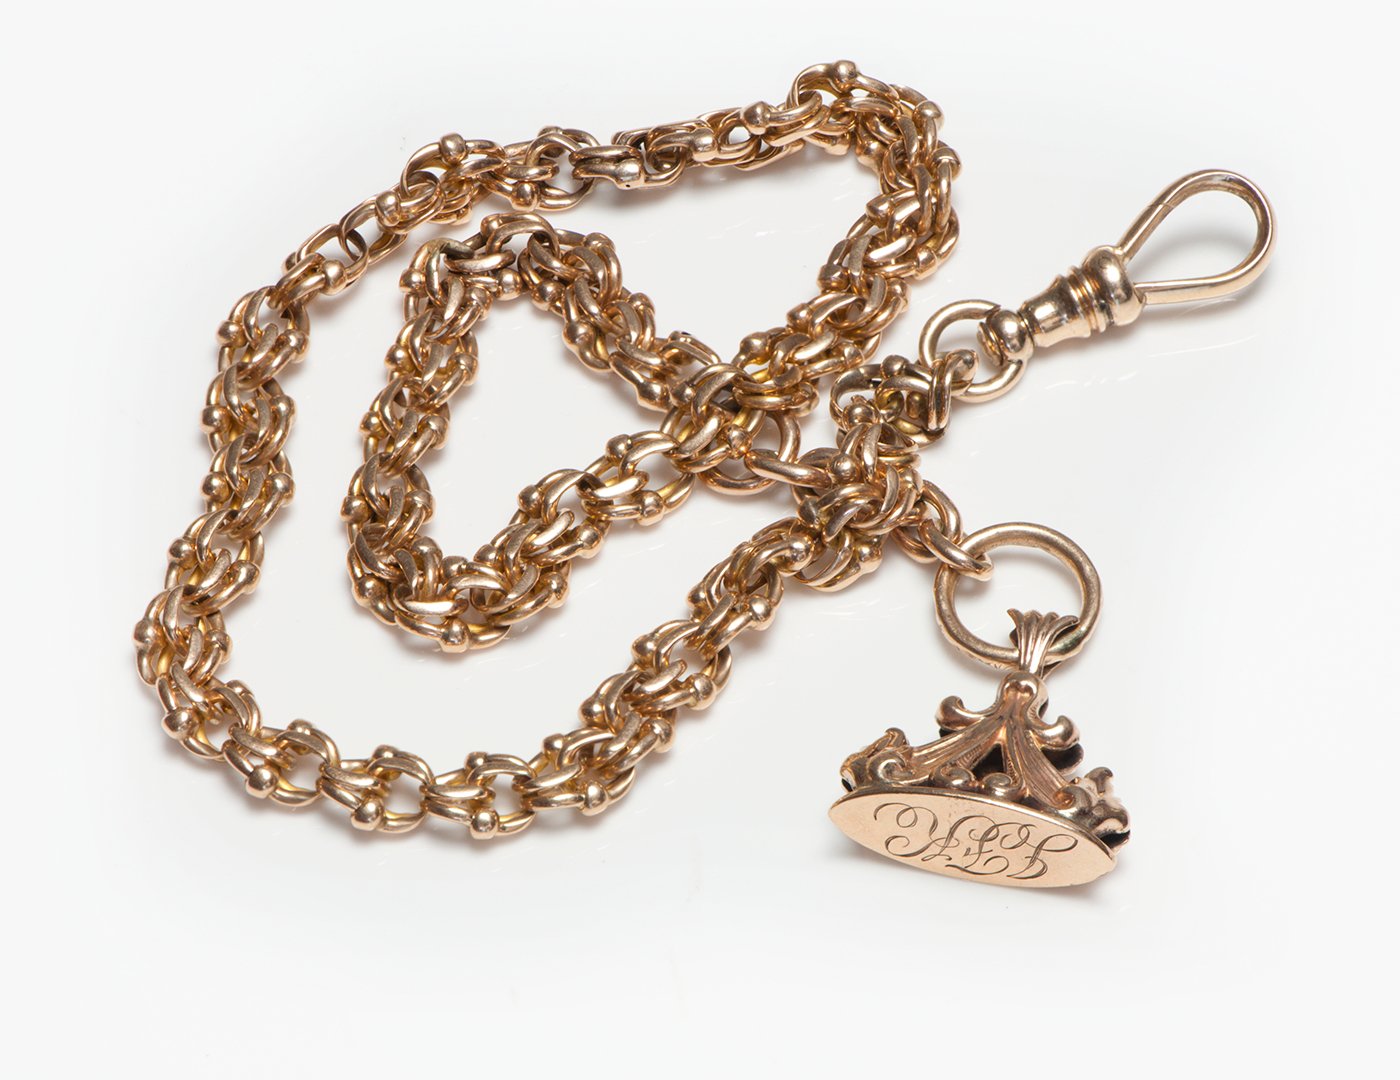 Antique Gold Watch Chain and Fob